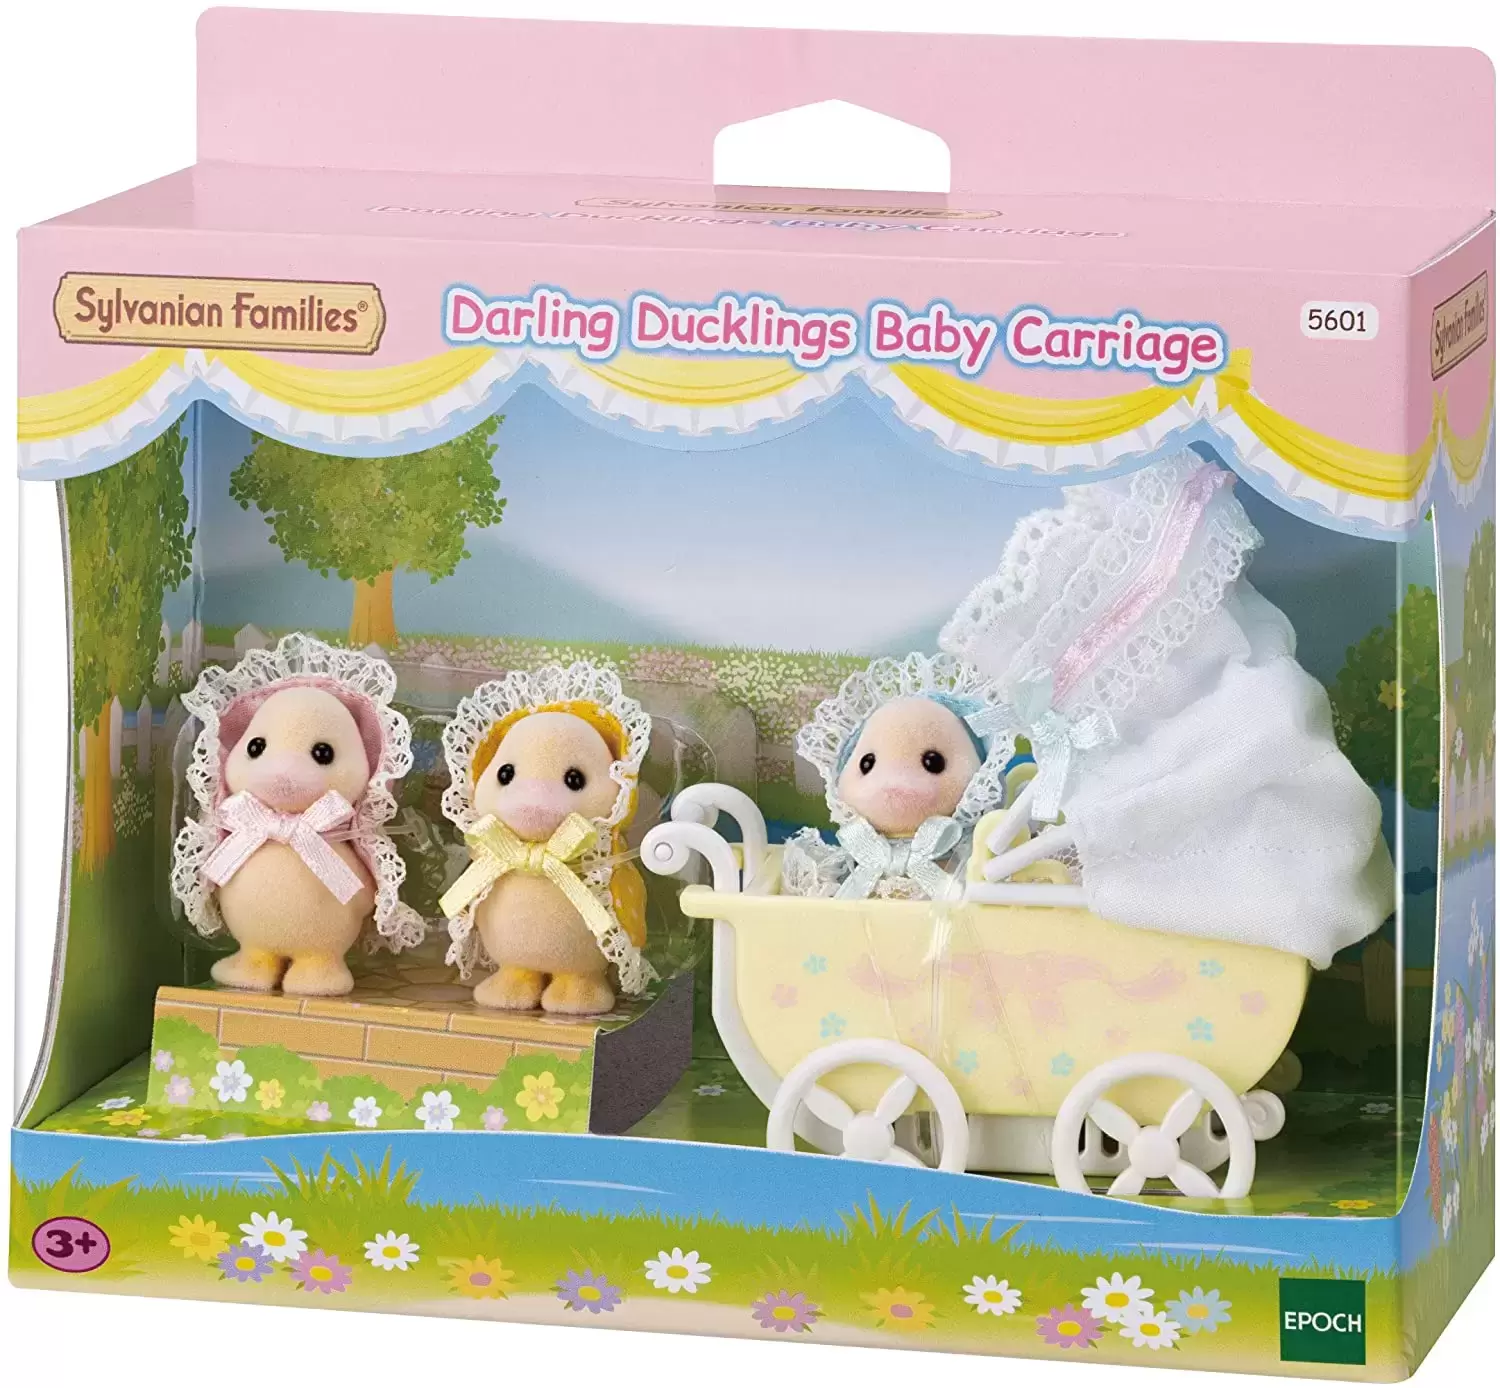 Sylvanian Families (Europe) - Darling Ducklings Baby Carriage